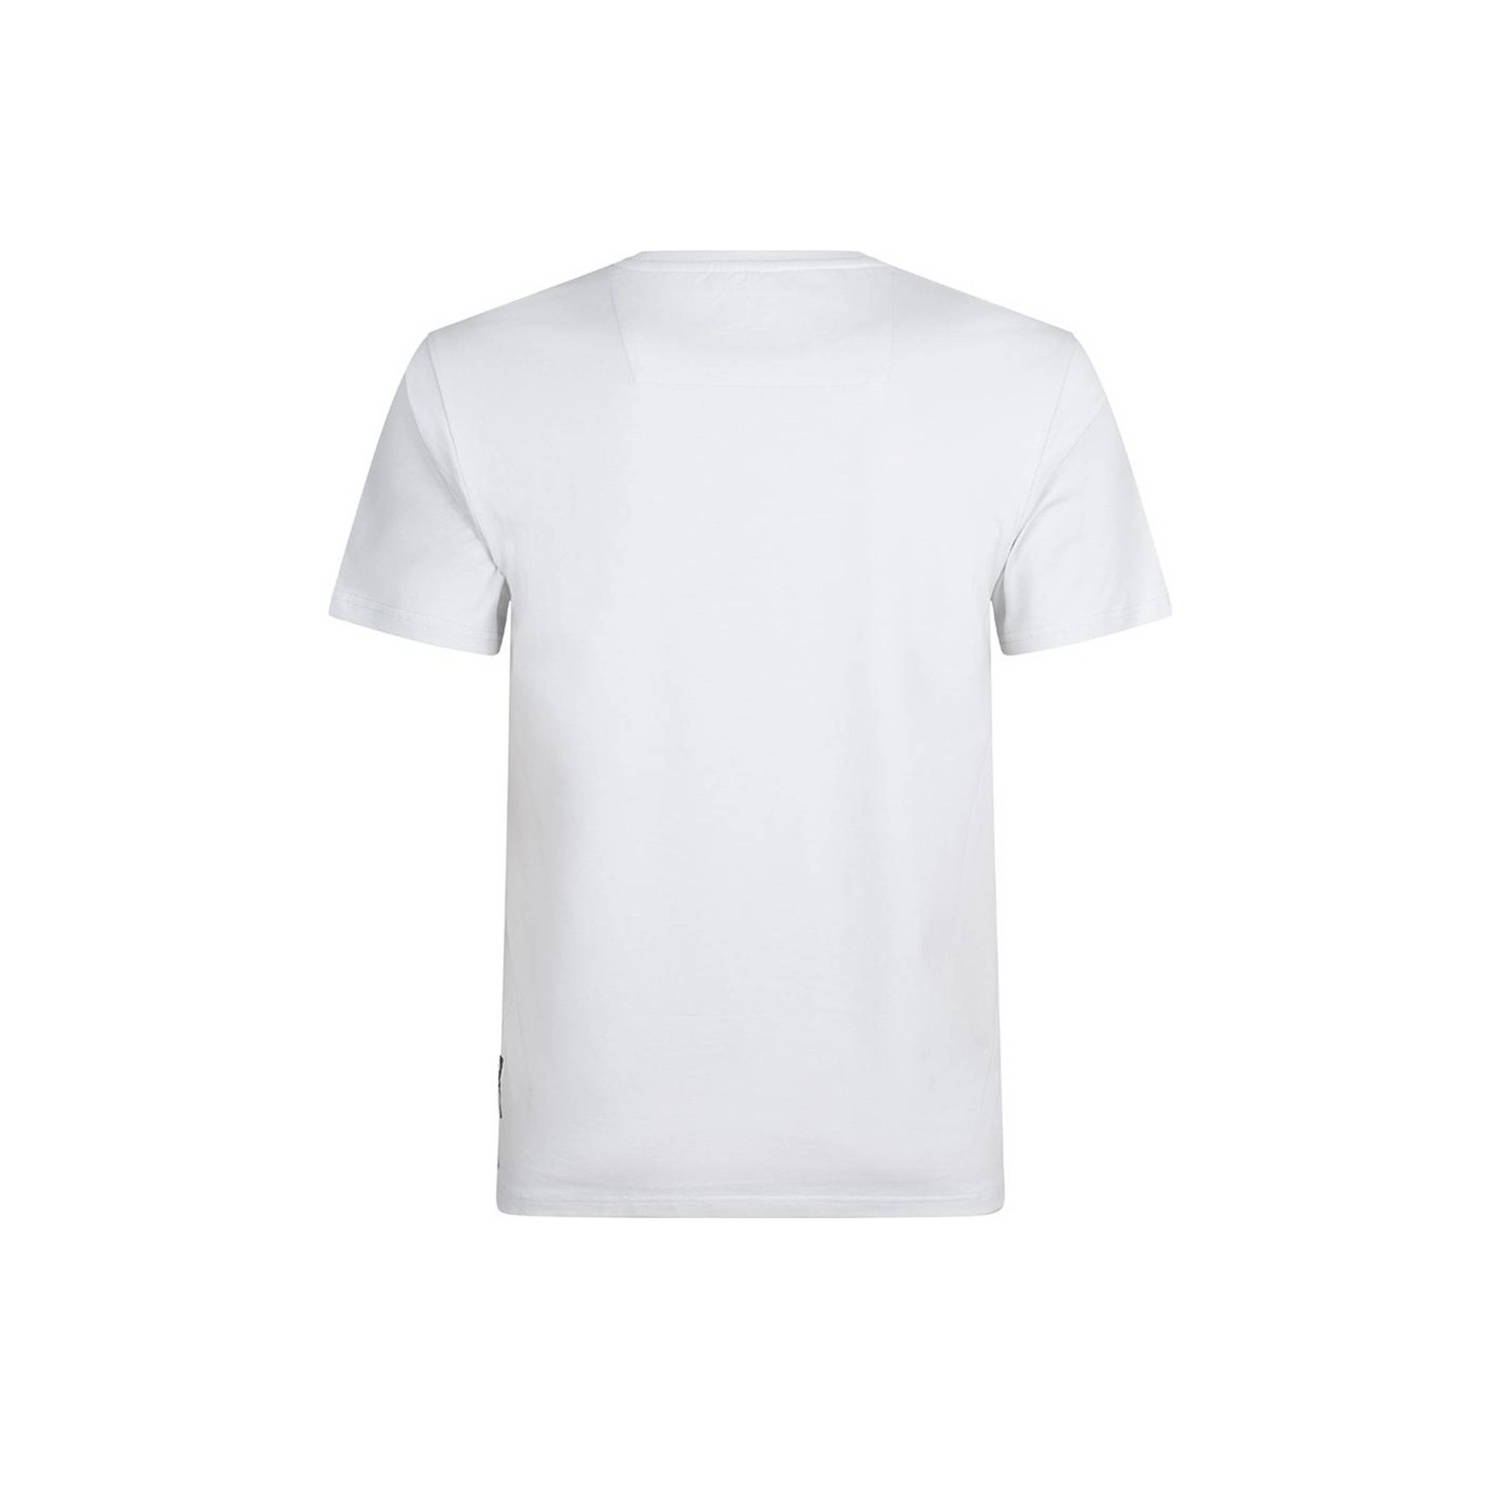 Rellix T-shirt offwhite